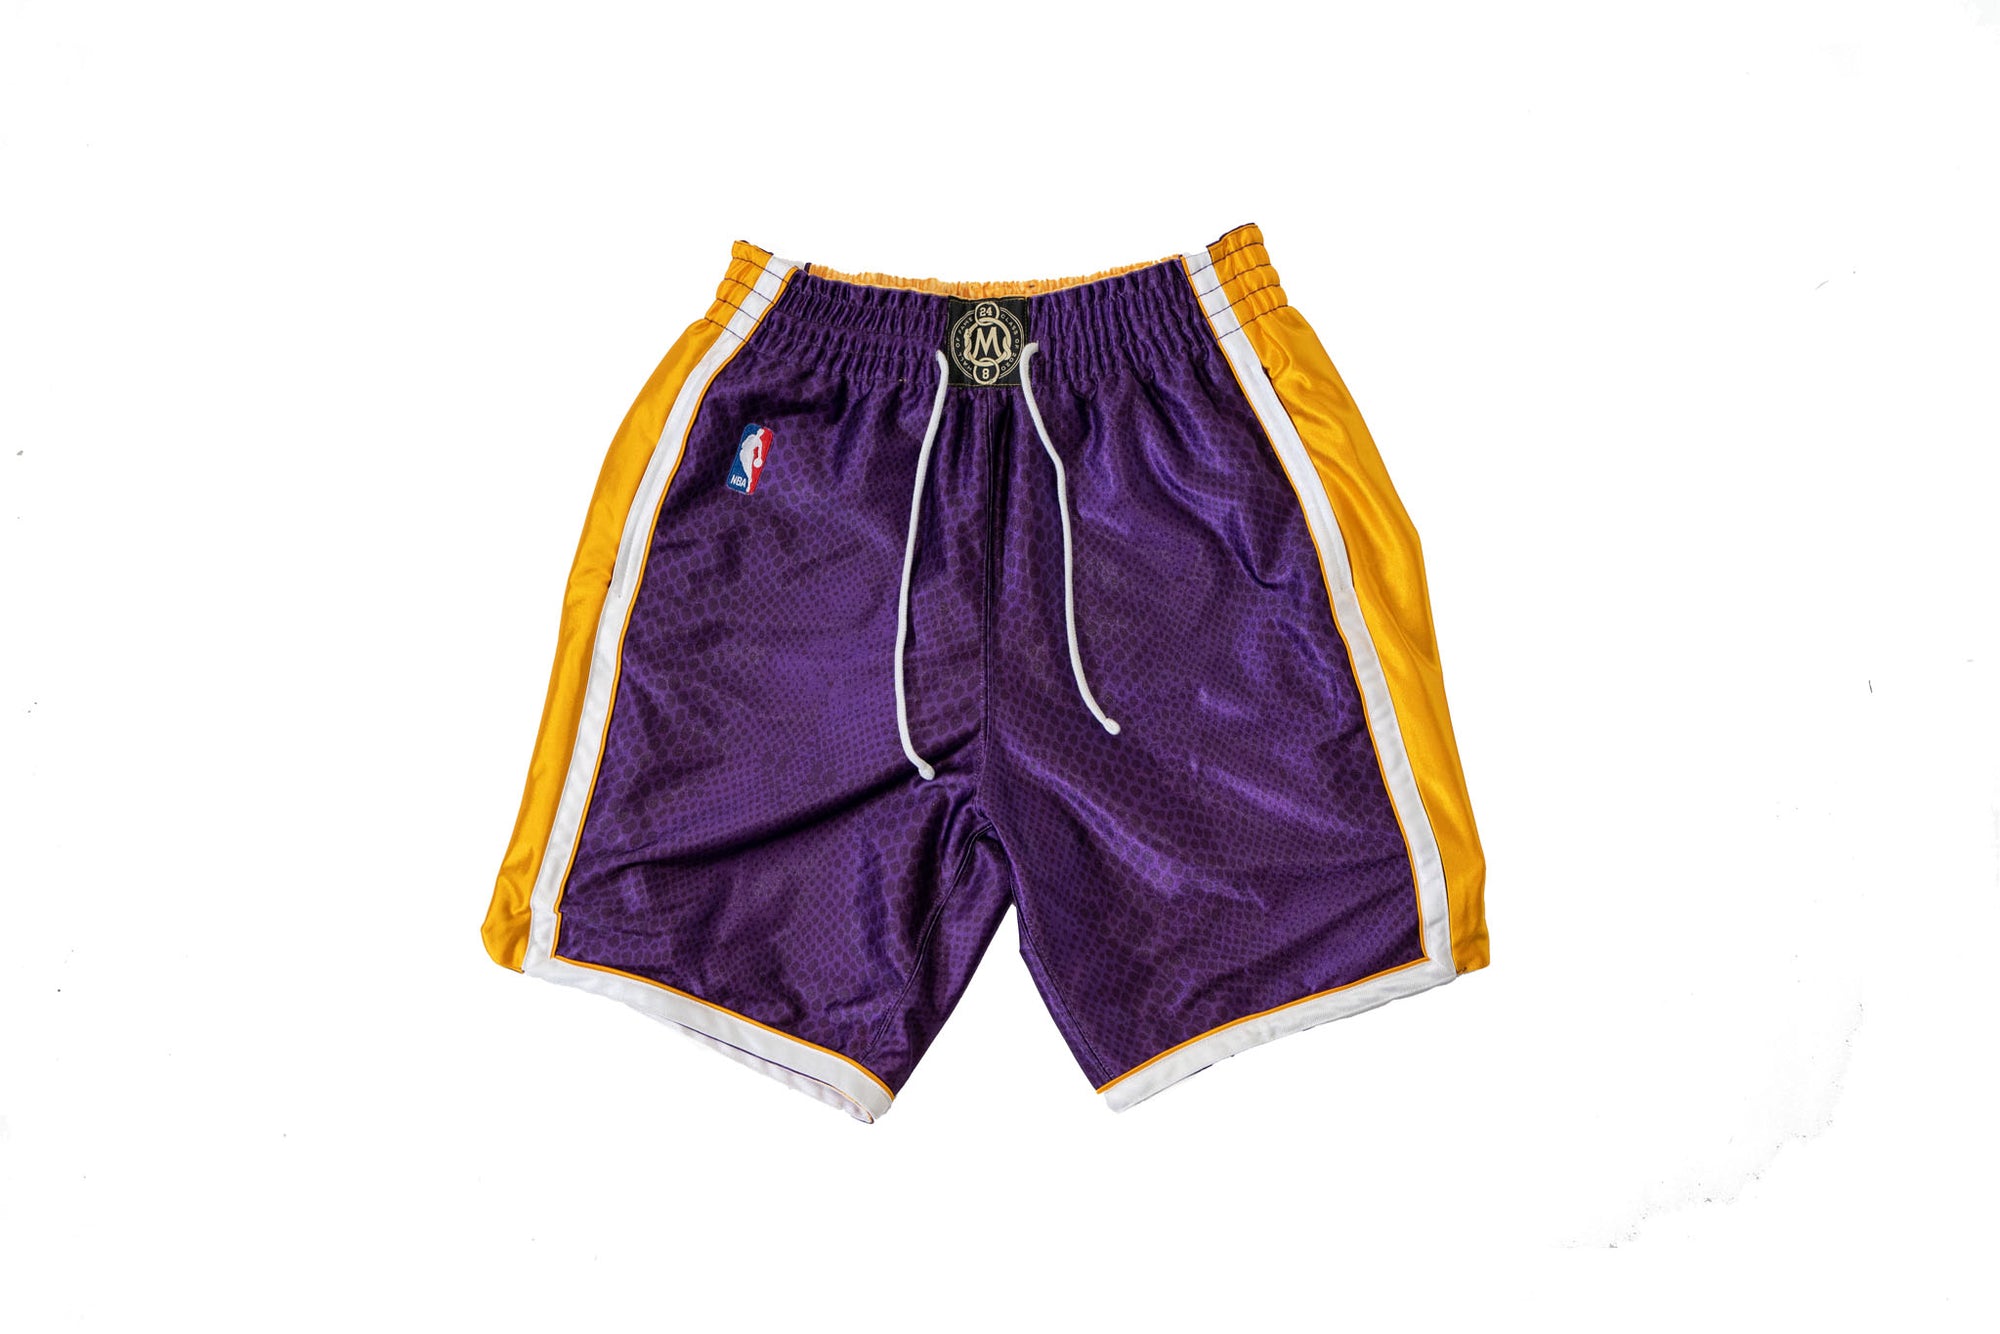 Los Angeles Lakers Mitchell & Ness NBA Authentic Shorts - Mens Size L